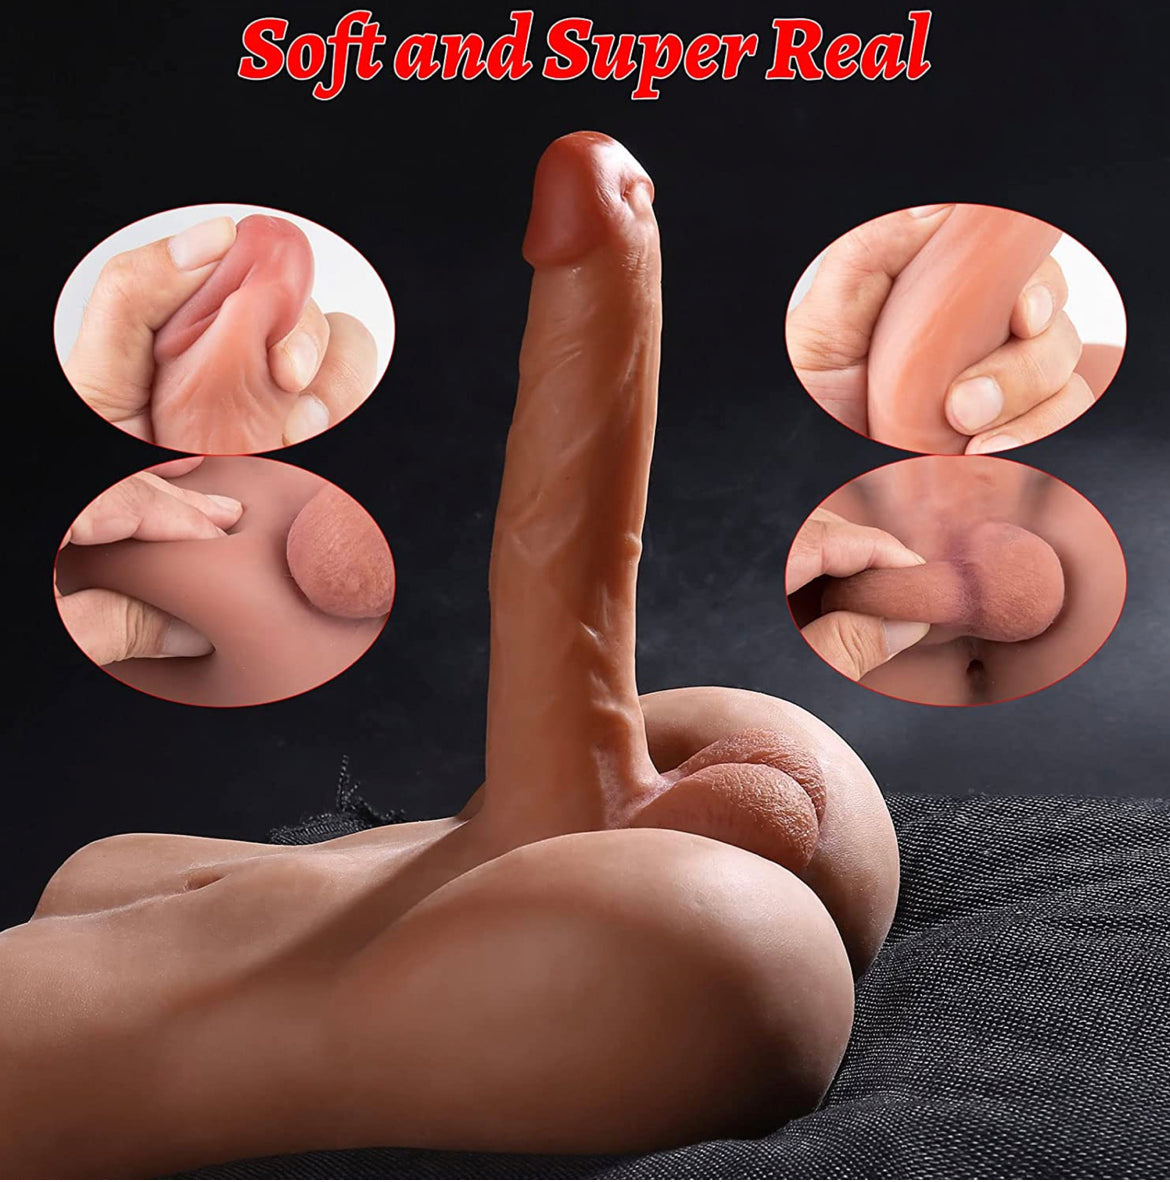 Male Sex Doll with Realistic Dildo 6.2lb